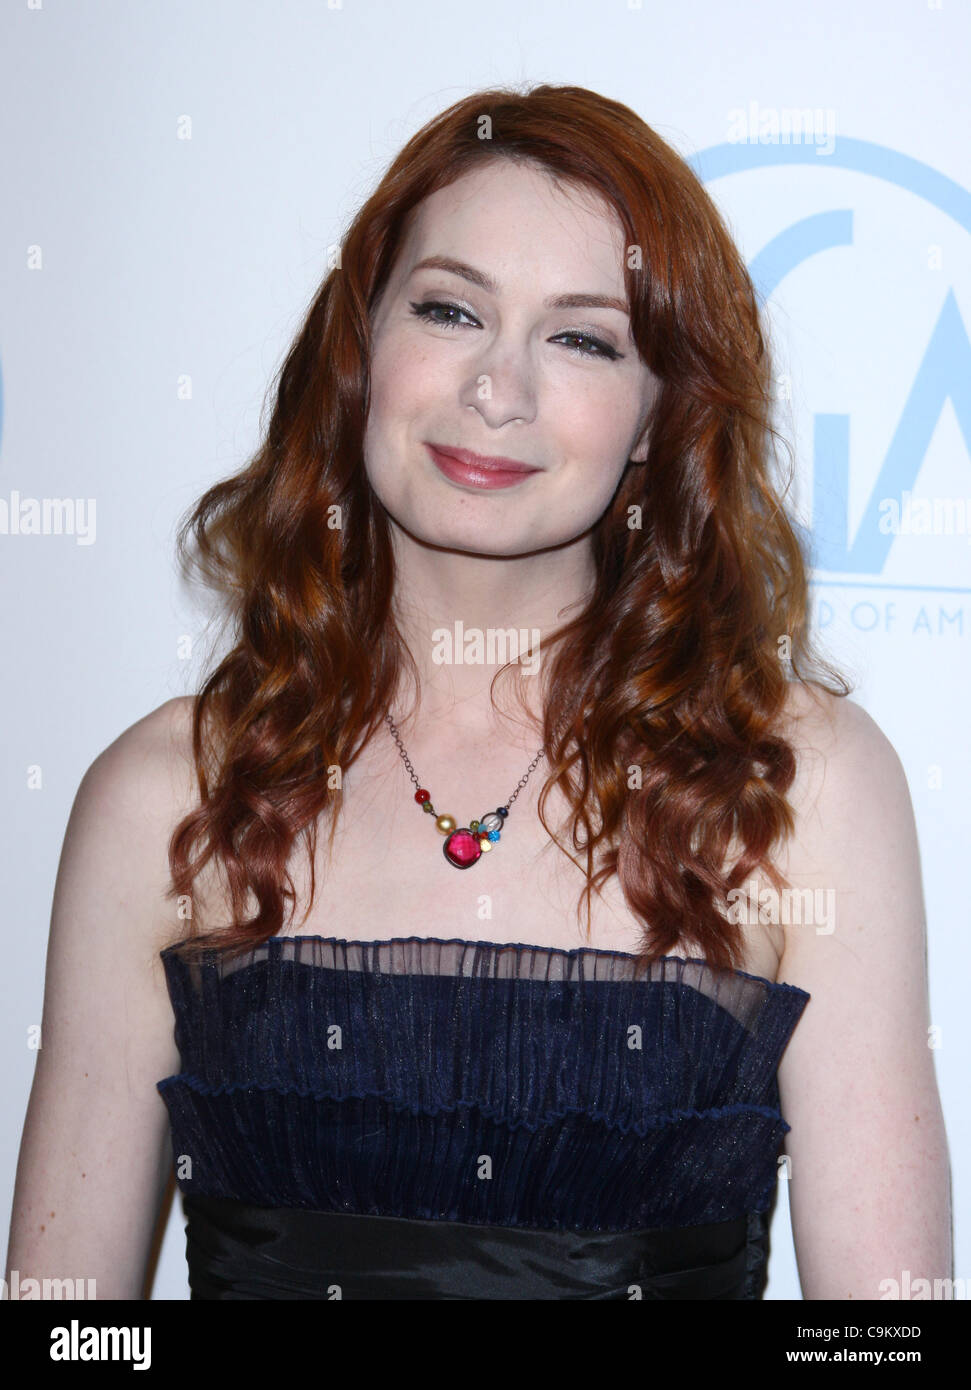 FELICIA DAY 23RD ANNUAL PRODUCERS GUILD OF AMERICA AWARDS BEVERLY HILLS CALIFORNIA USA 21 January 2012 Stock Photo